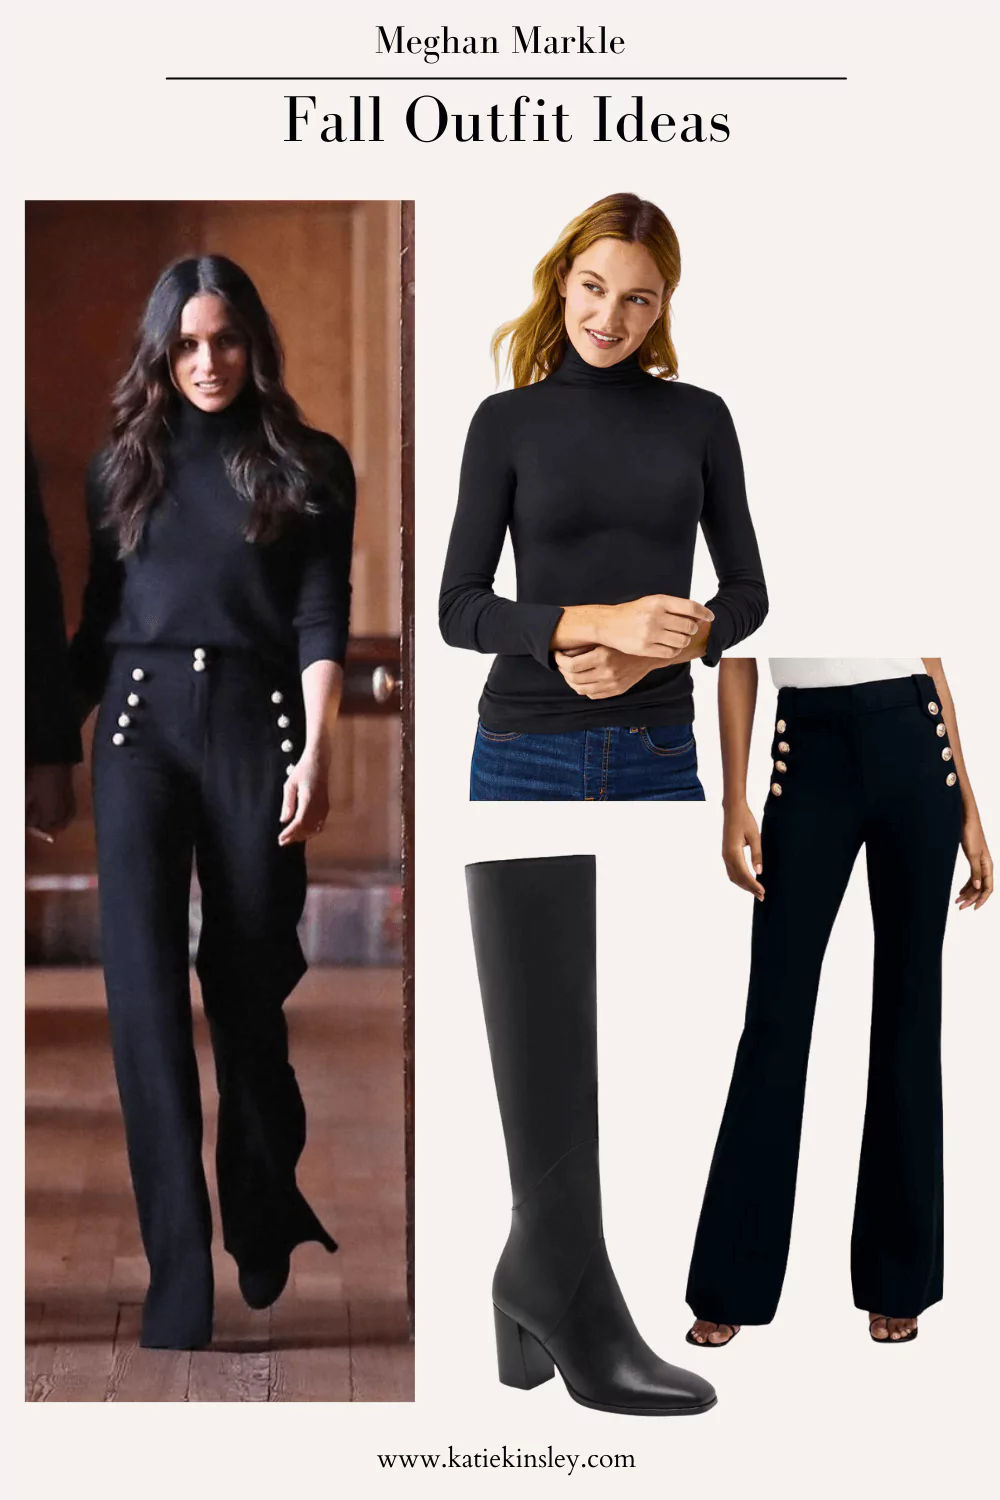 Fall Outfit ideas Meghan Markle Outfit 4